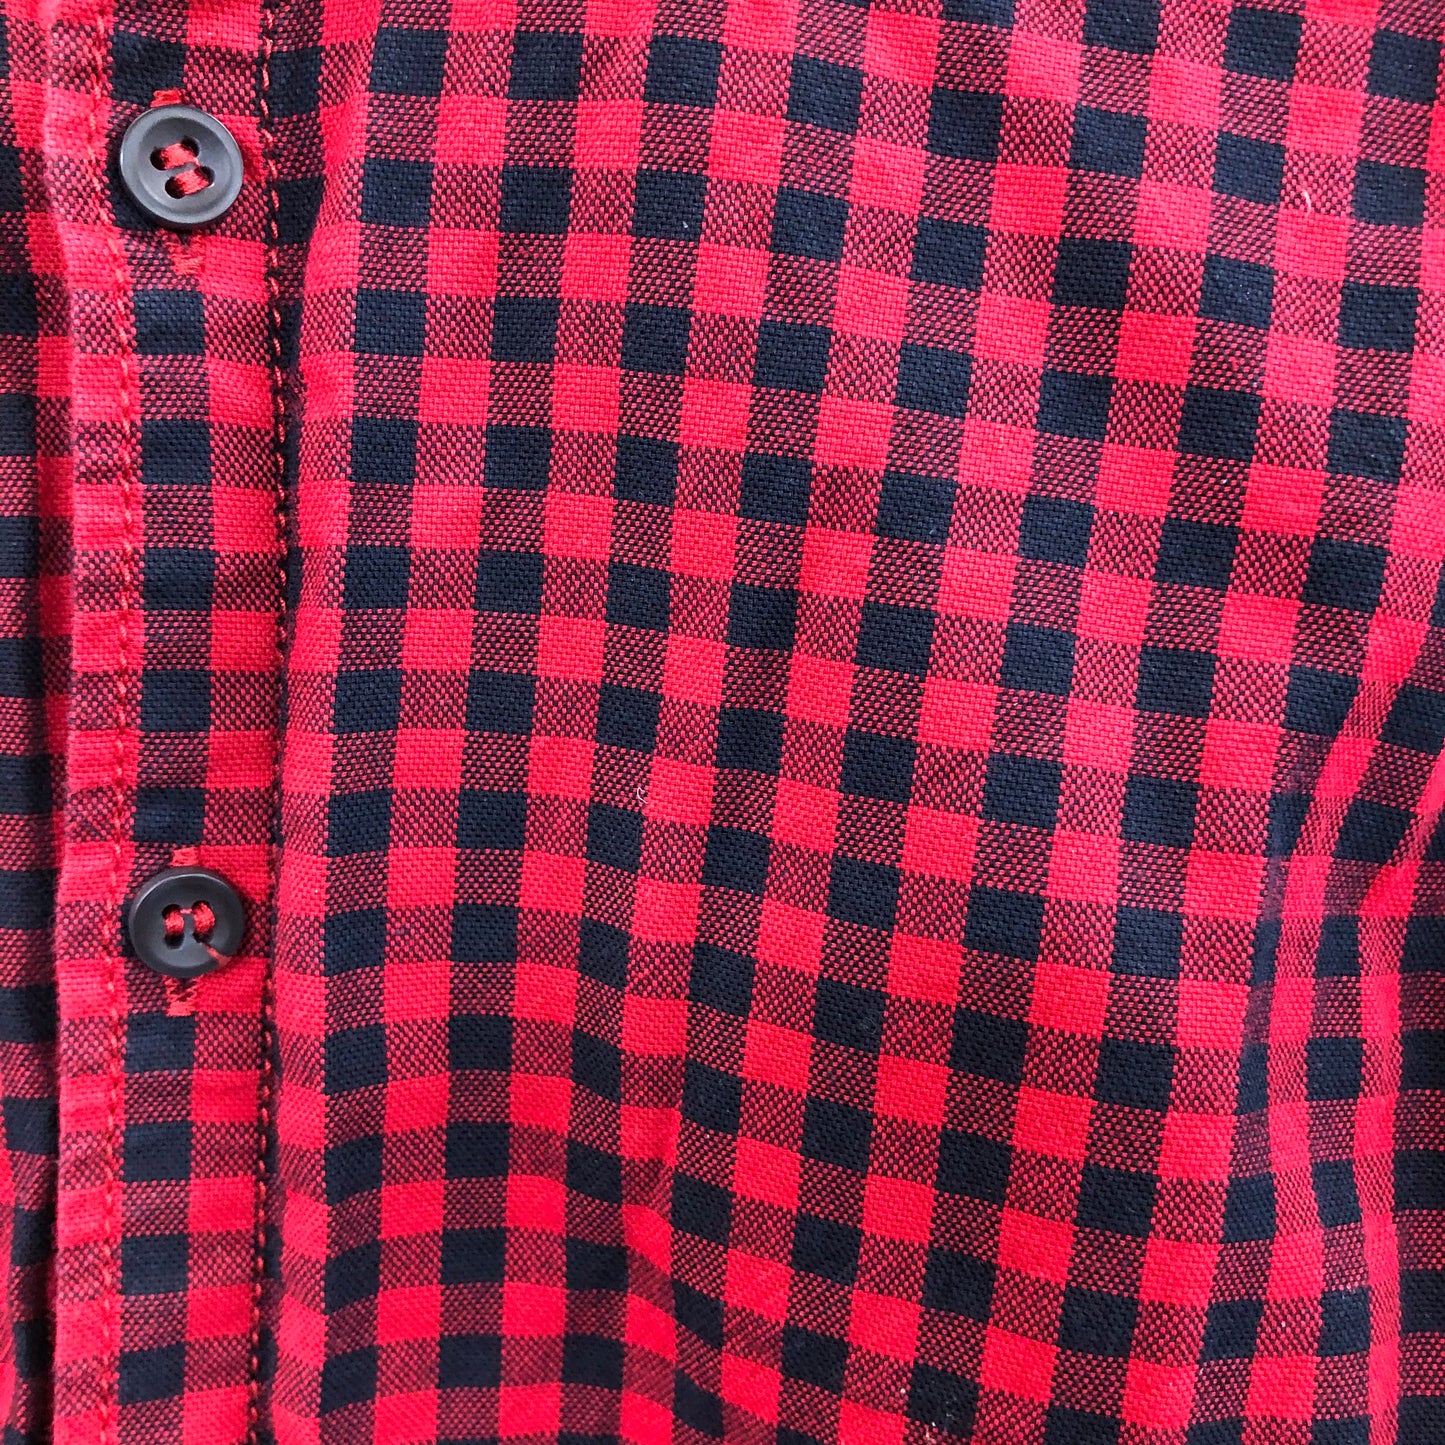 Shirt - Checked Red Black - Age 4